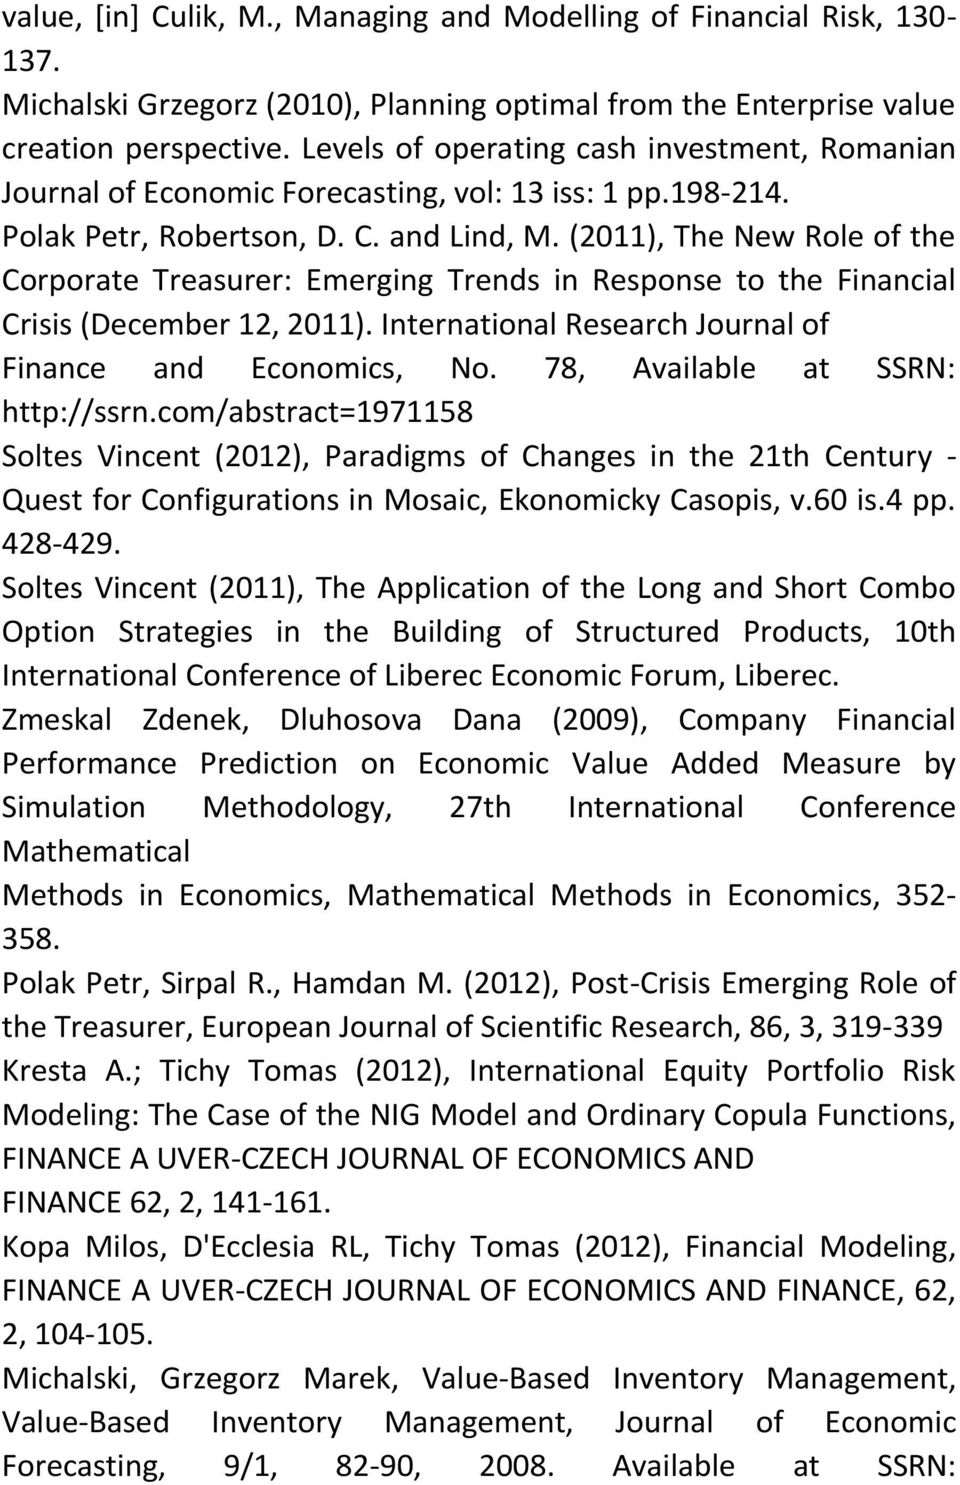 (2011), The New Role of the Corporate Treasurer: Emerging Trends in Response to the Financial Crisis (December 12, 2011). International Research Journal of Finance and Economics, No.